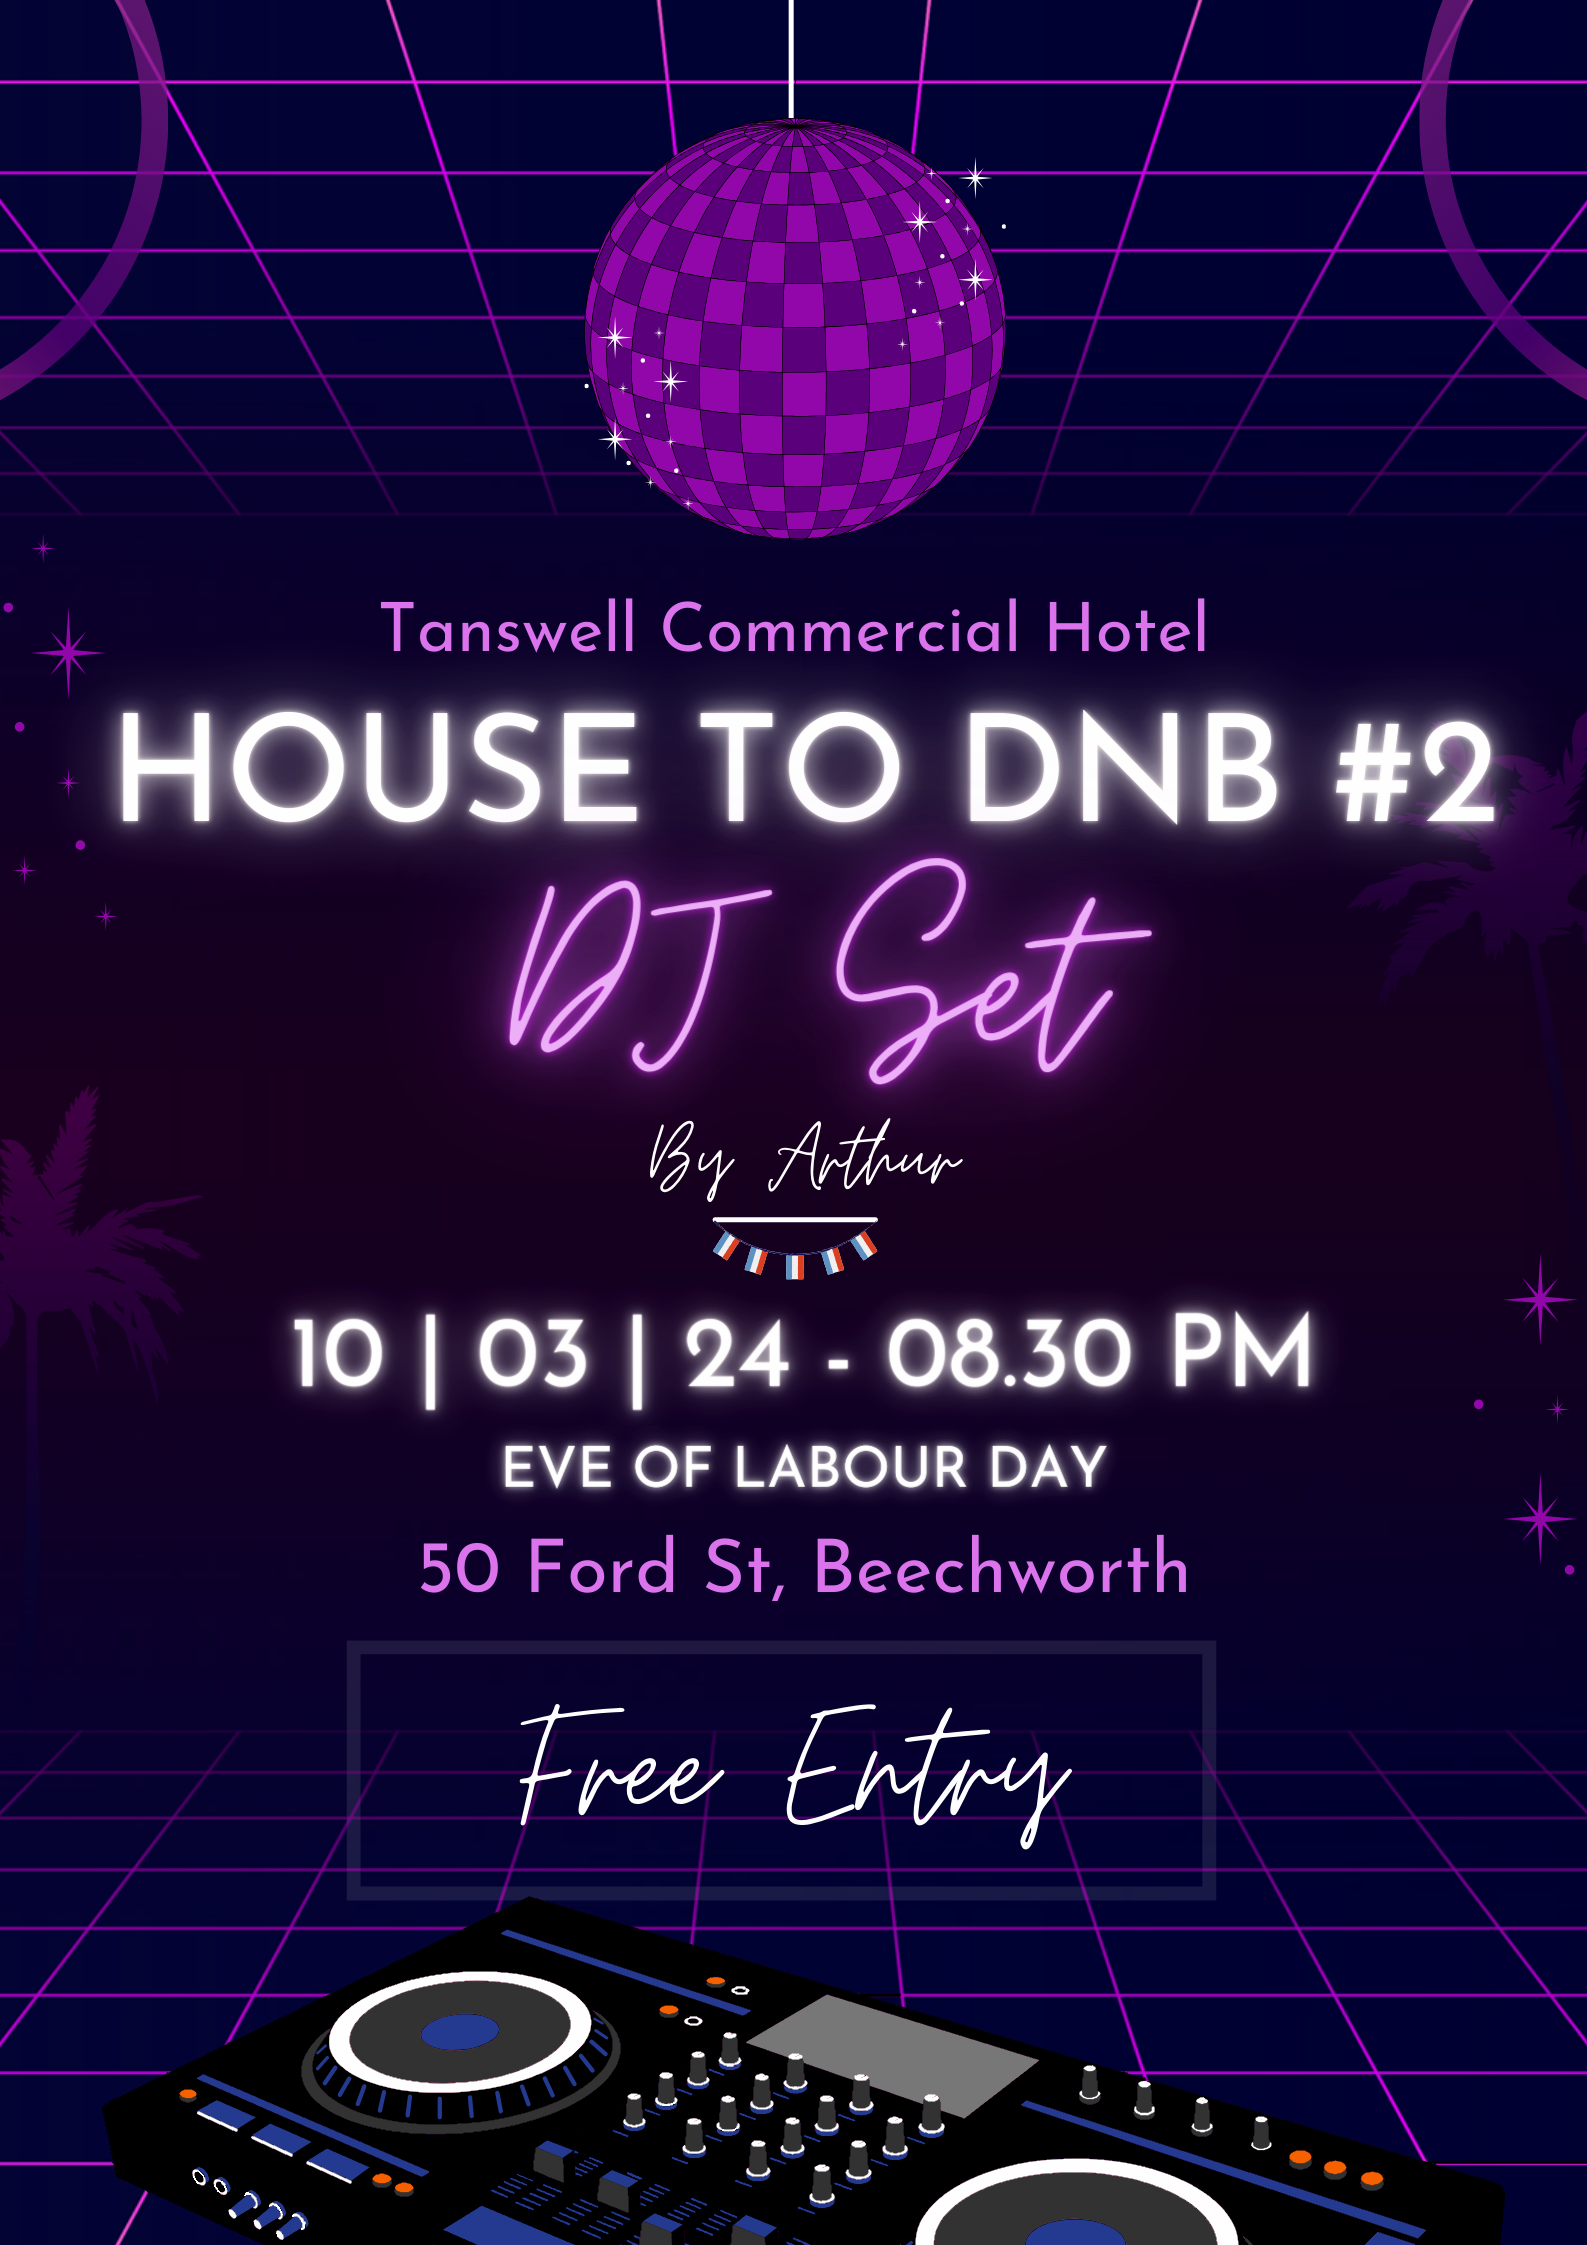 House to DNB #2